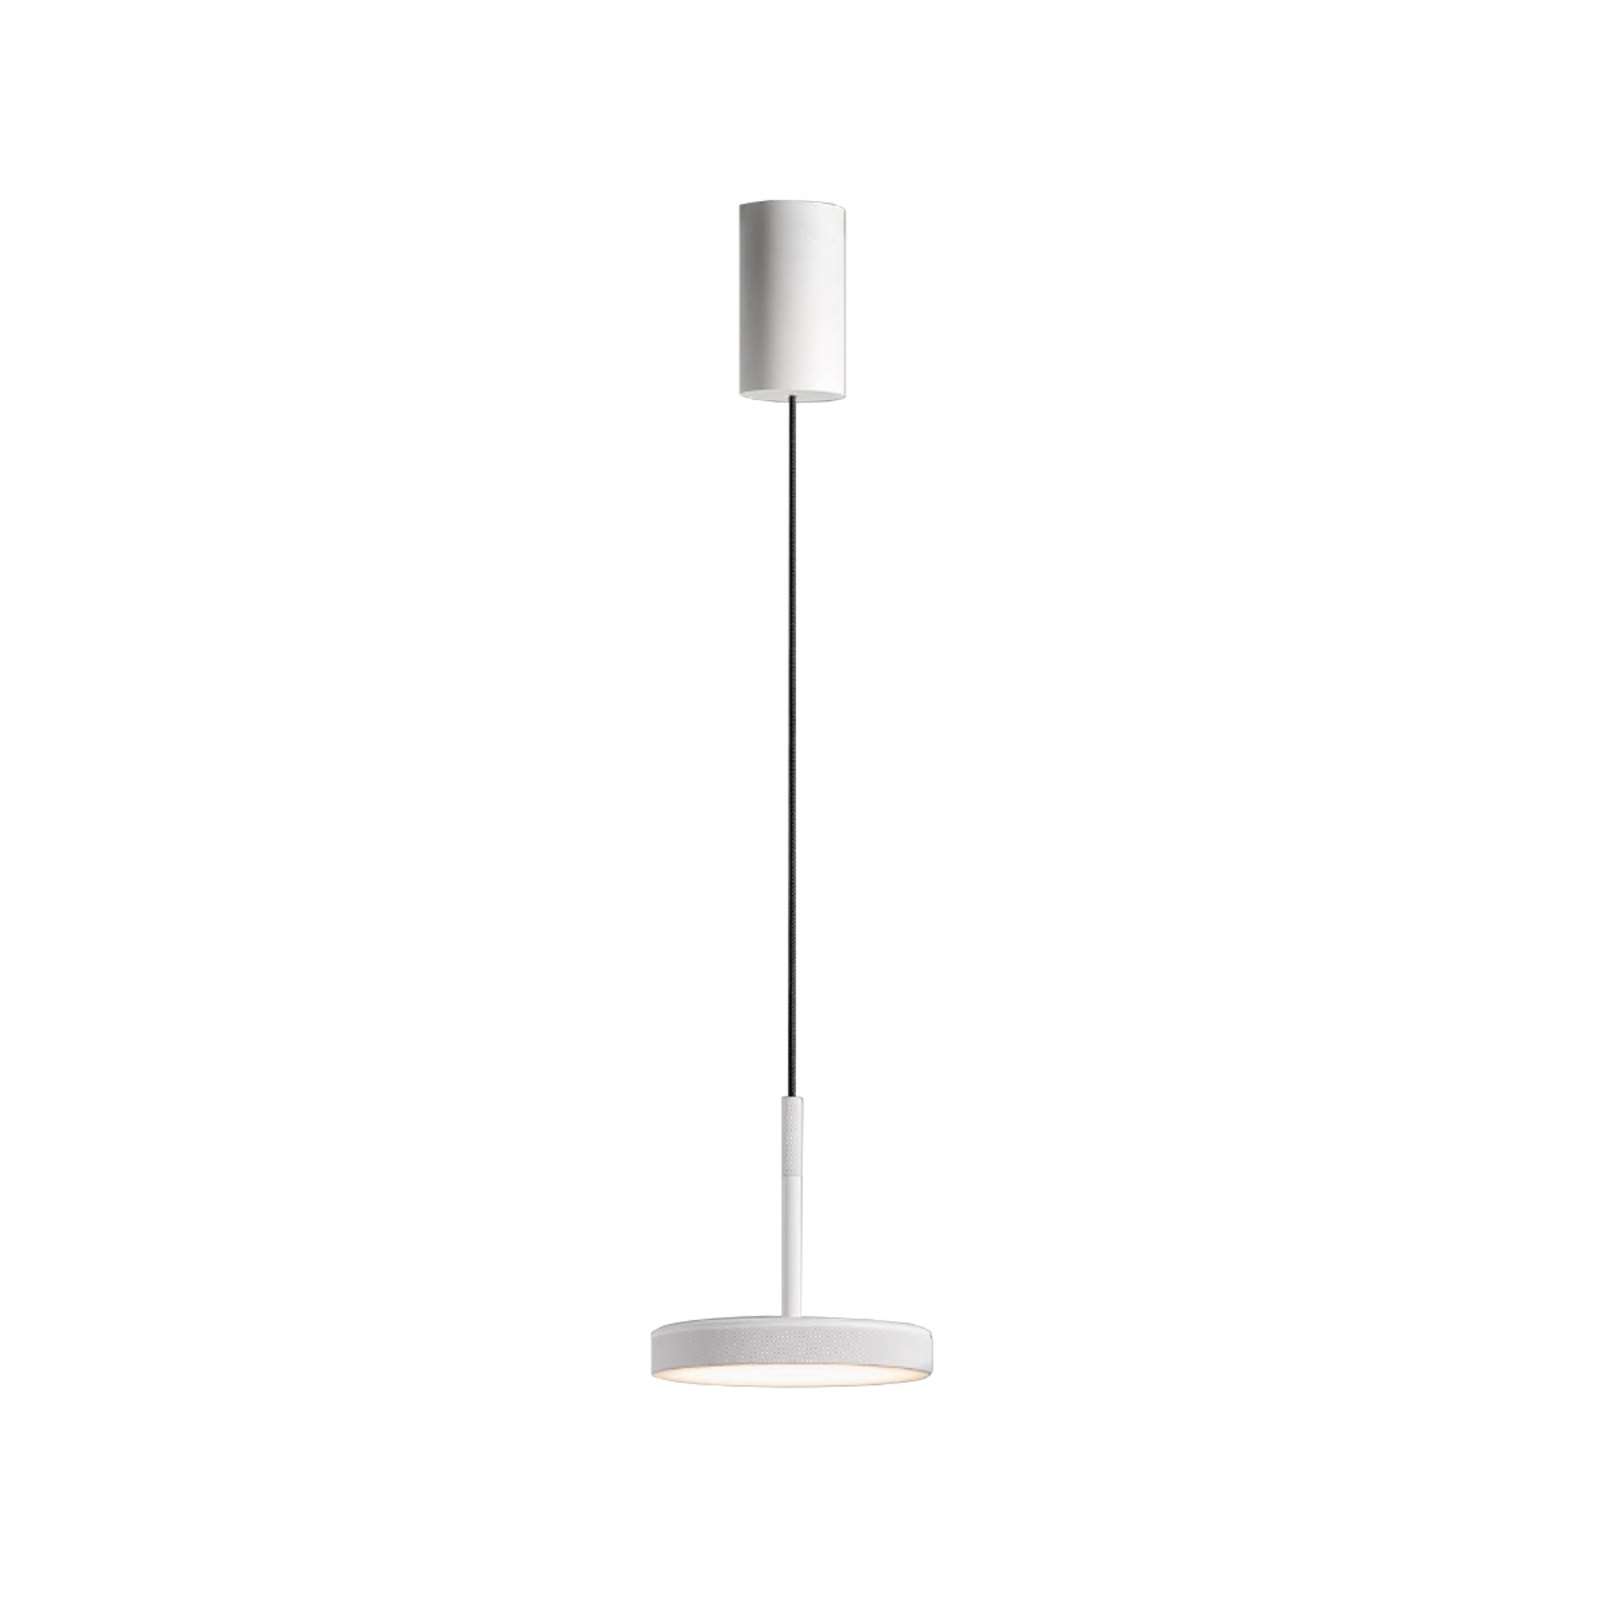 OLEV Overfly hanglamp wit/wit